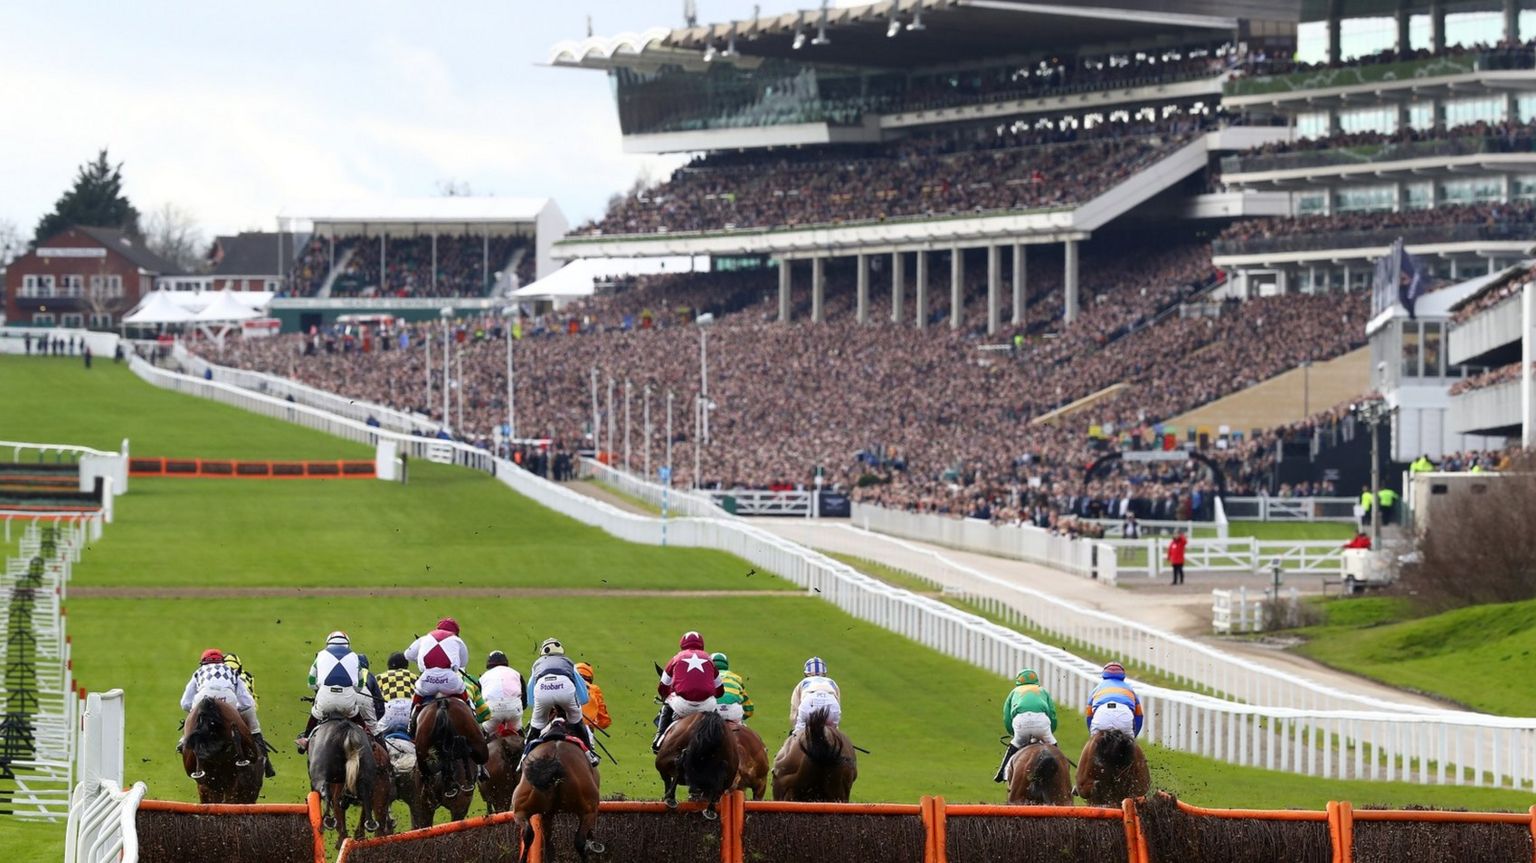 Horses and jockeys race down the final straight at Cheltenham, with packed grandstands in the background